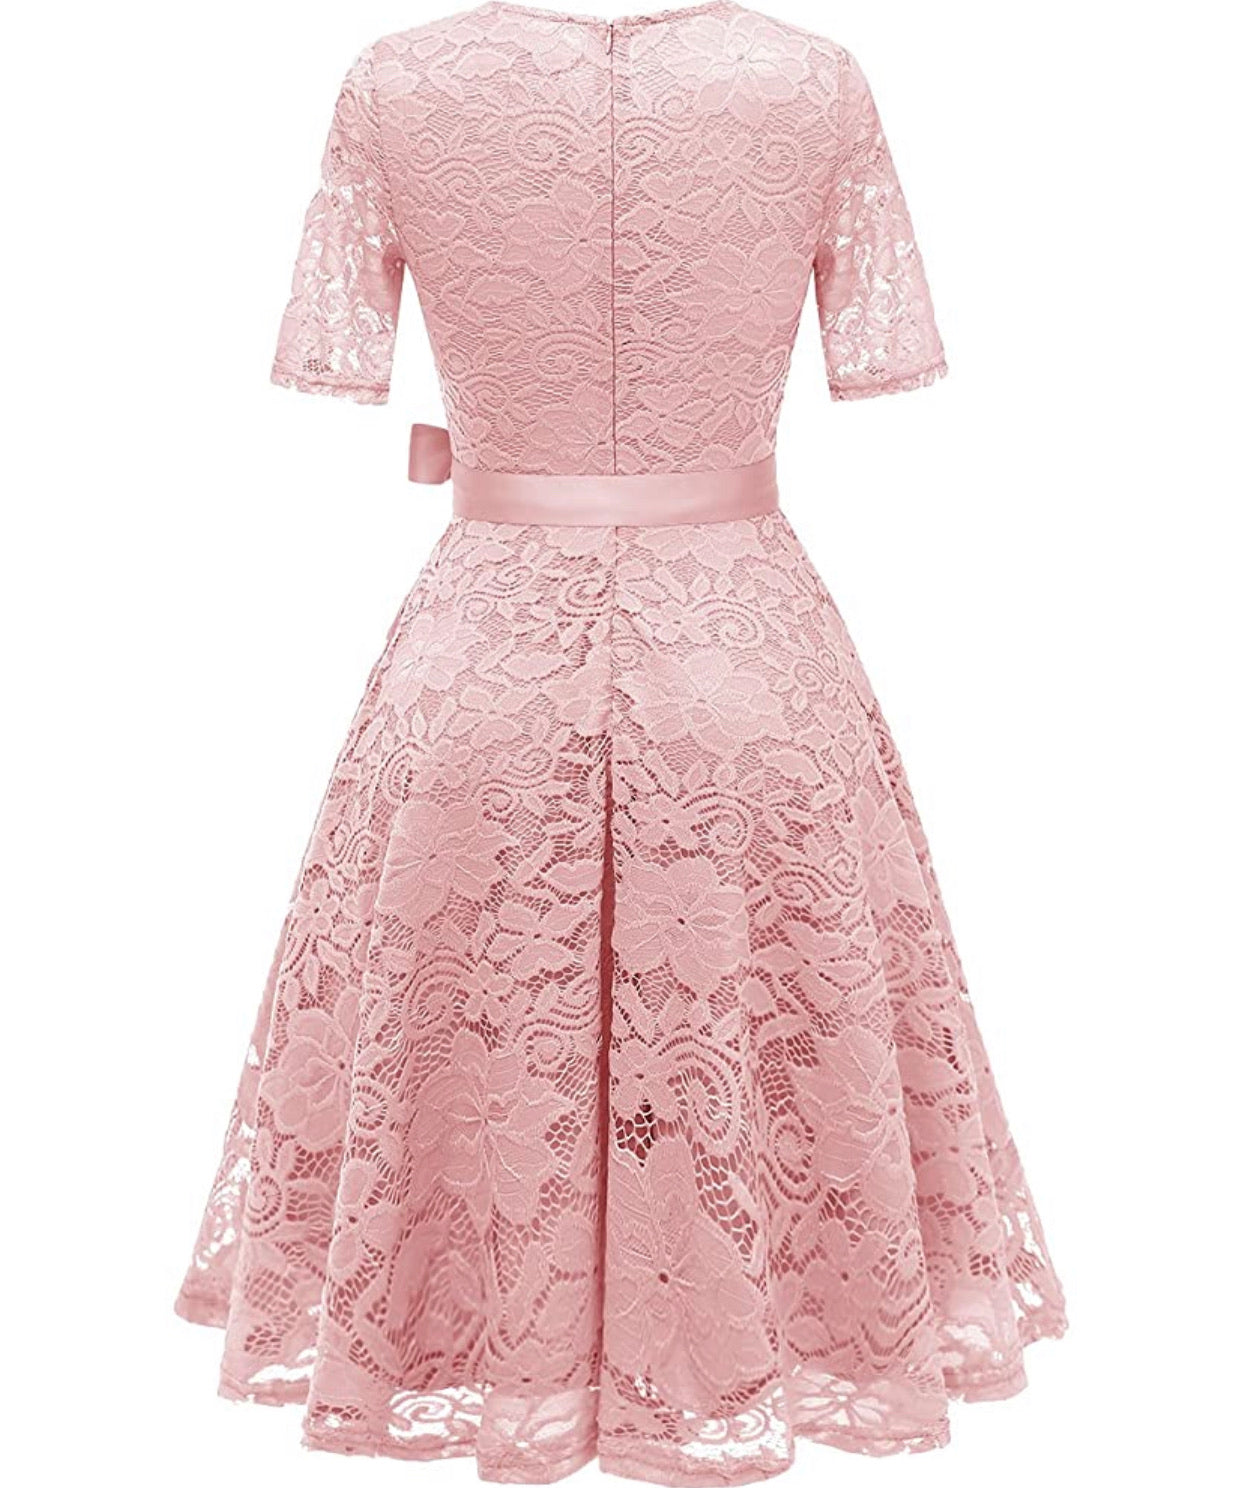 Vintage Inspired Full Lace Cocktail Dress, Sizes Small - 3XLarge (Pink)